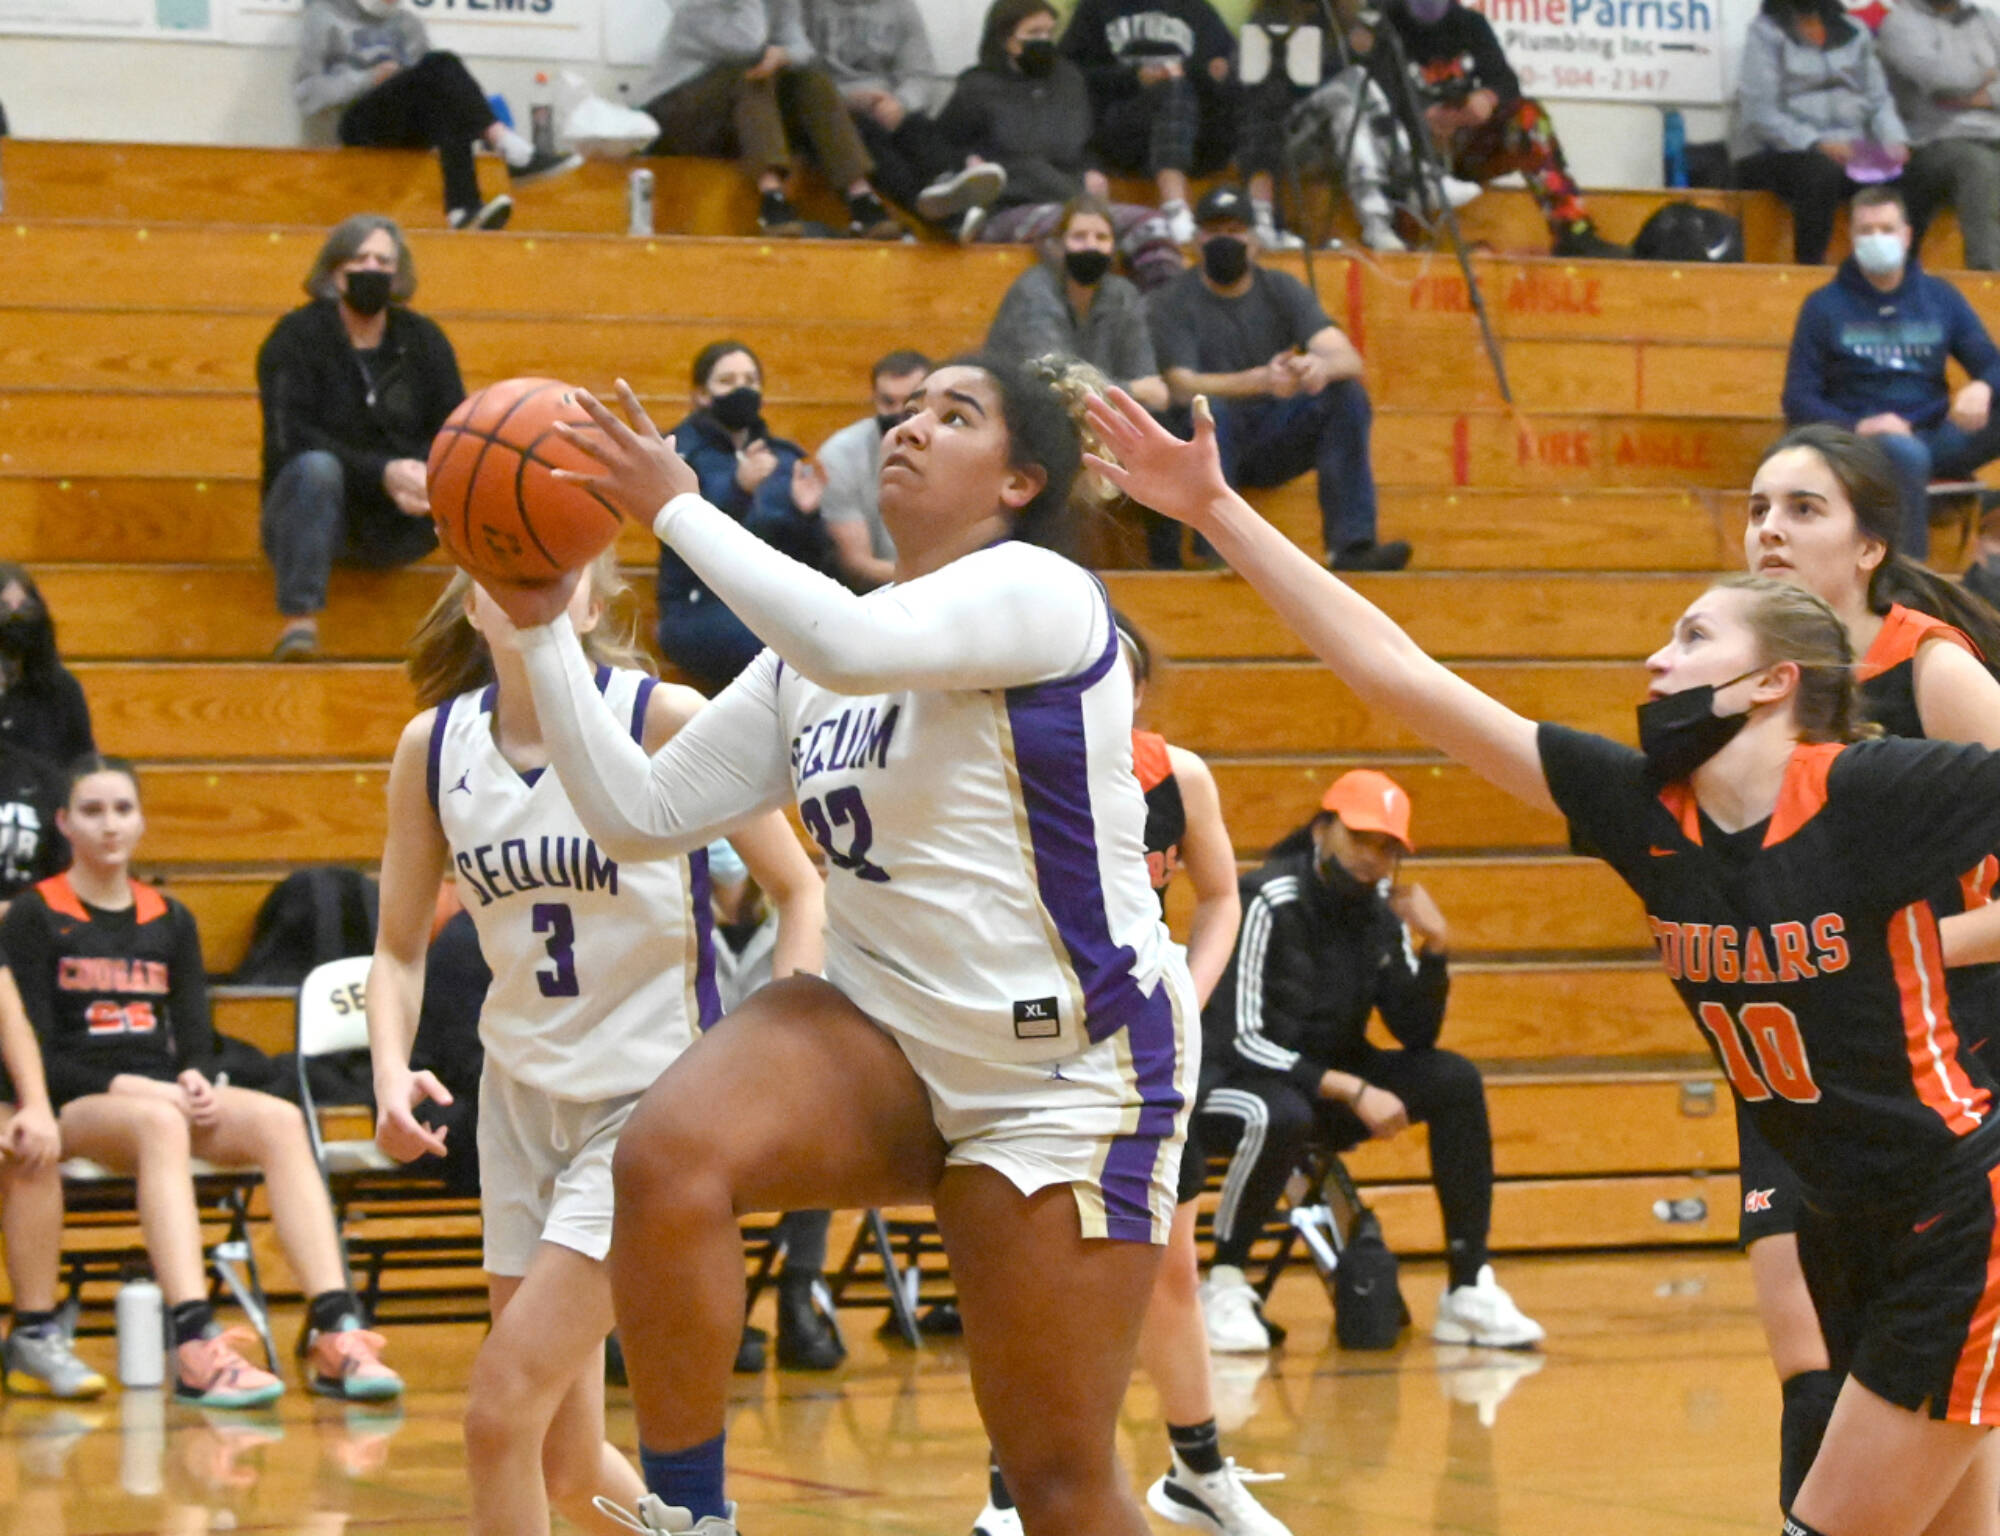 Sequim's Jelissa Julmist drives to the basket against Central Kitsap on Monday in Sequim. Also in on the play is Sequim's Sammie Bacon (3). (Michael Dashiell/Olympic Peninsula News Group)